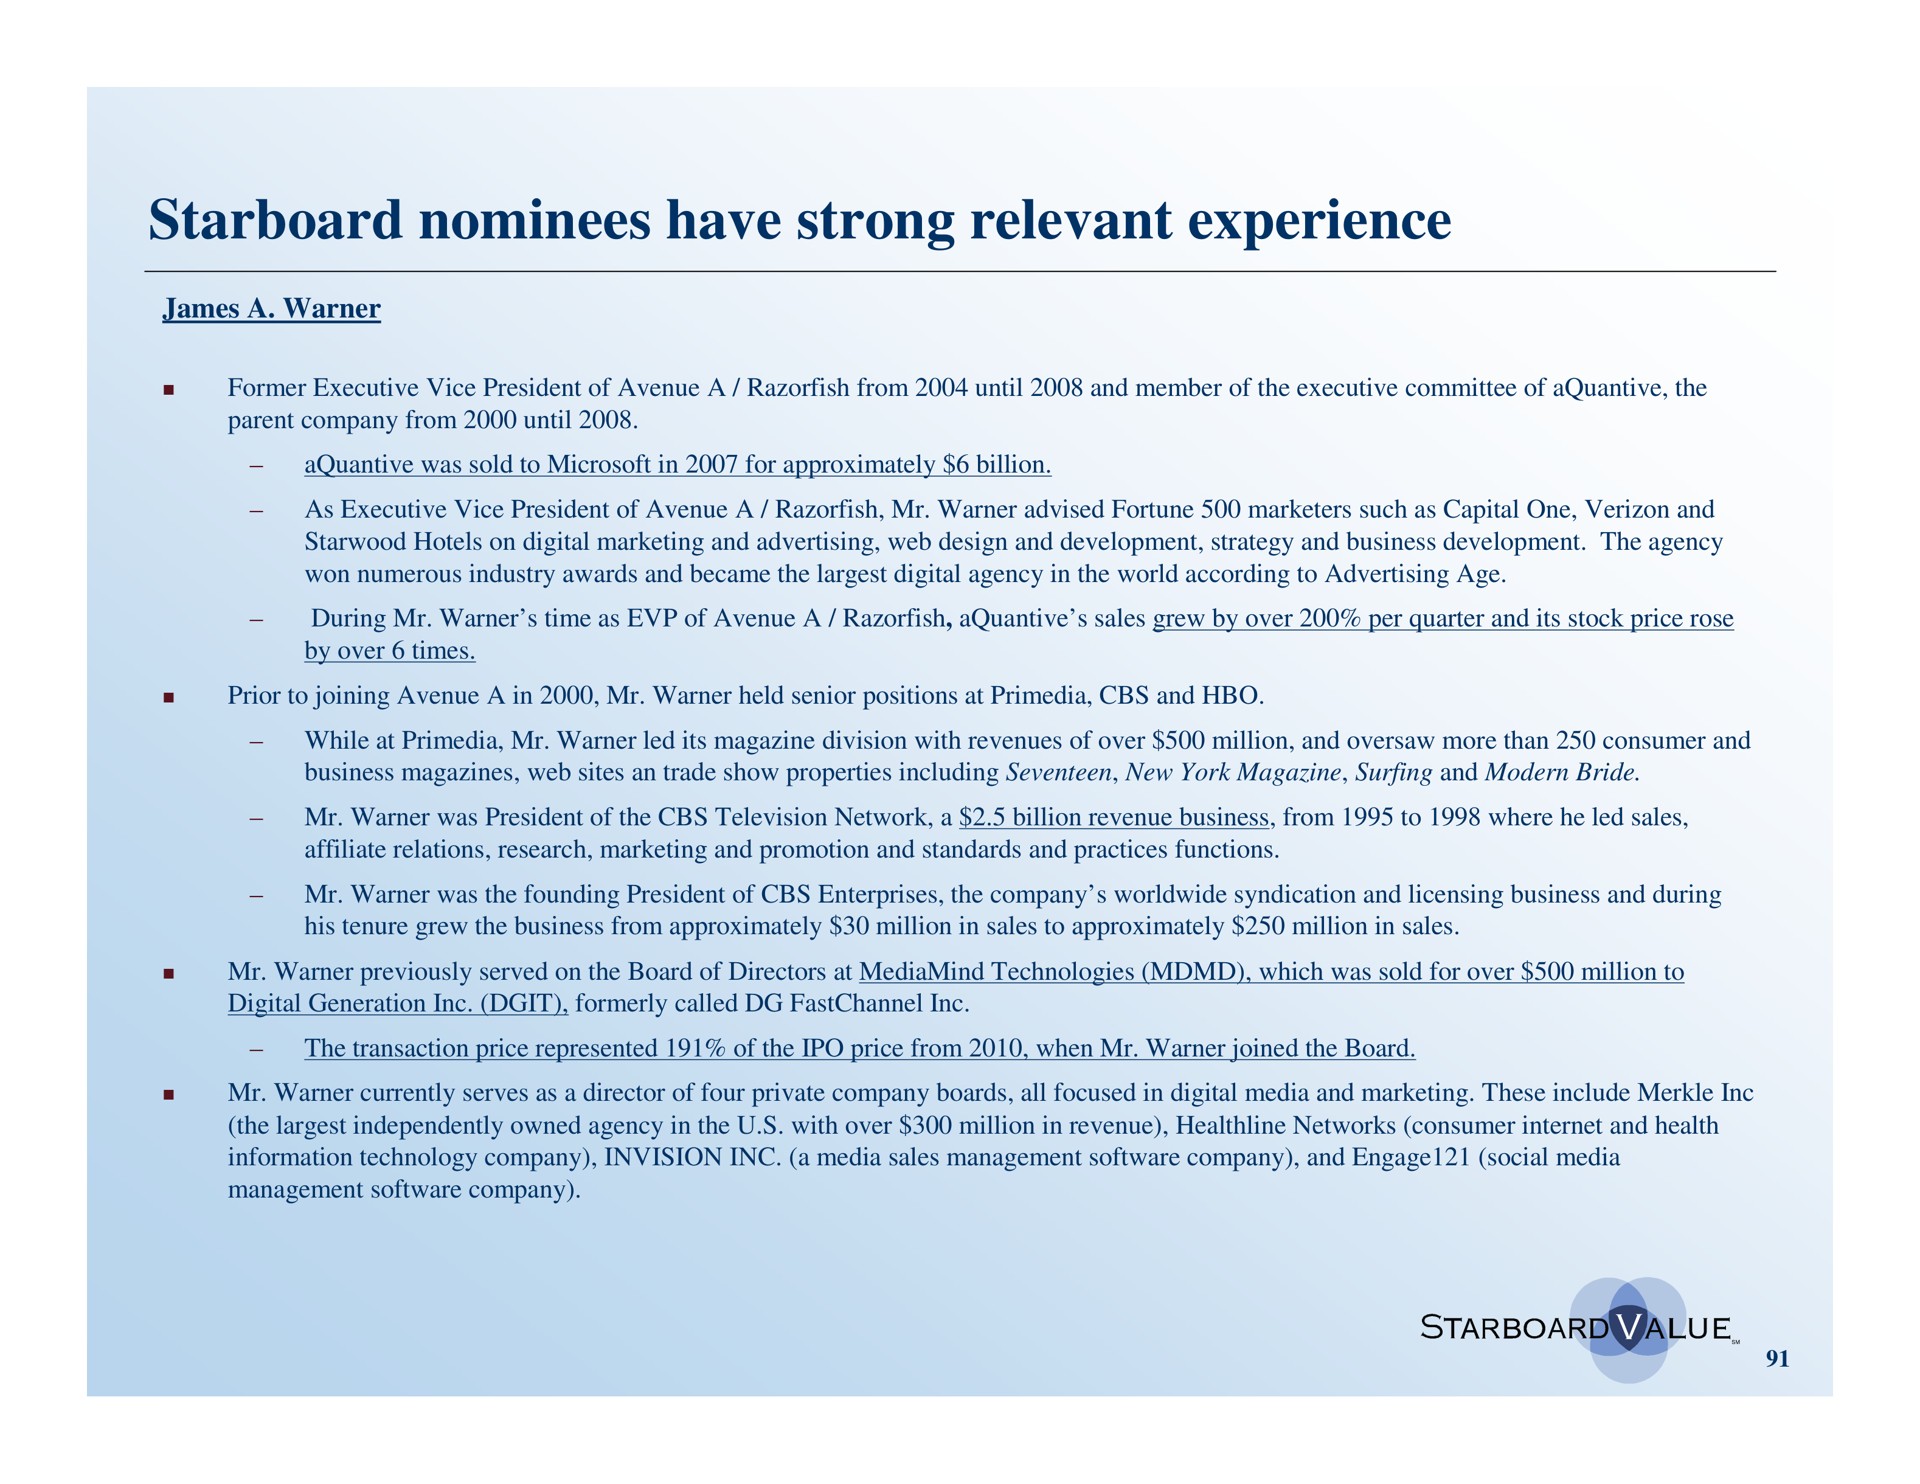 starboard nominees have strong relevant experience | Starboard Value